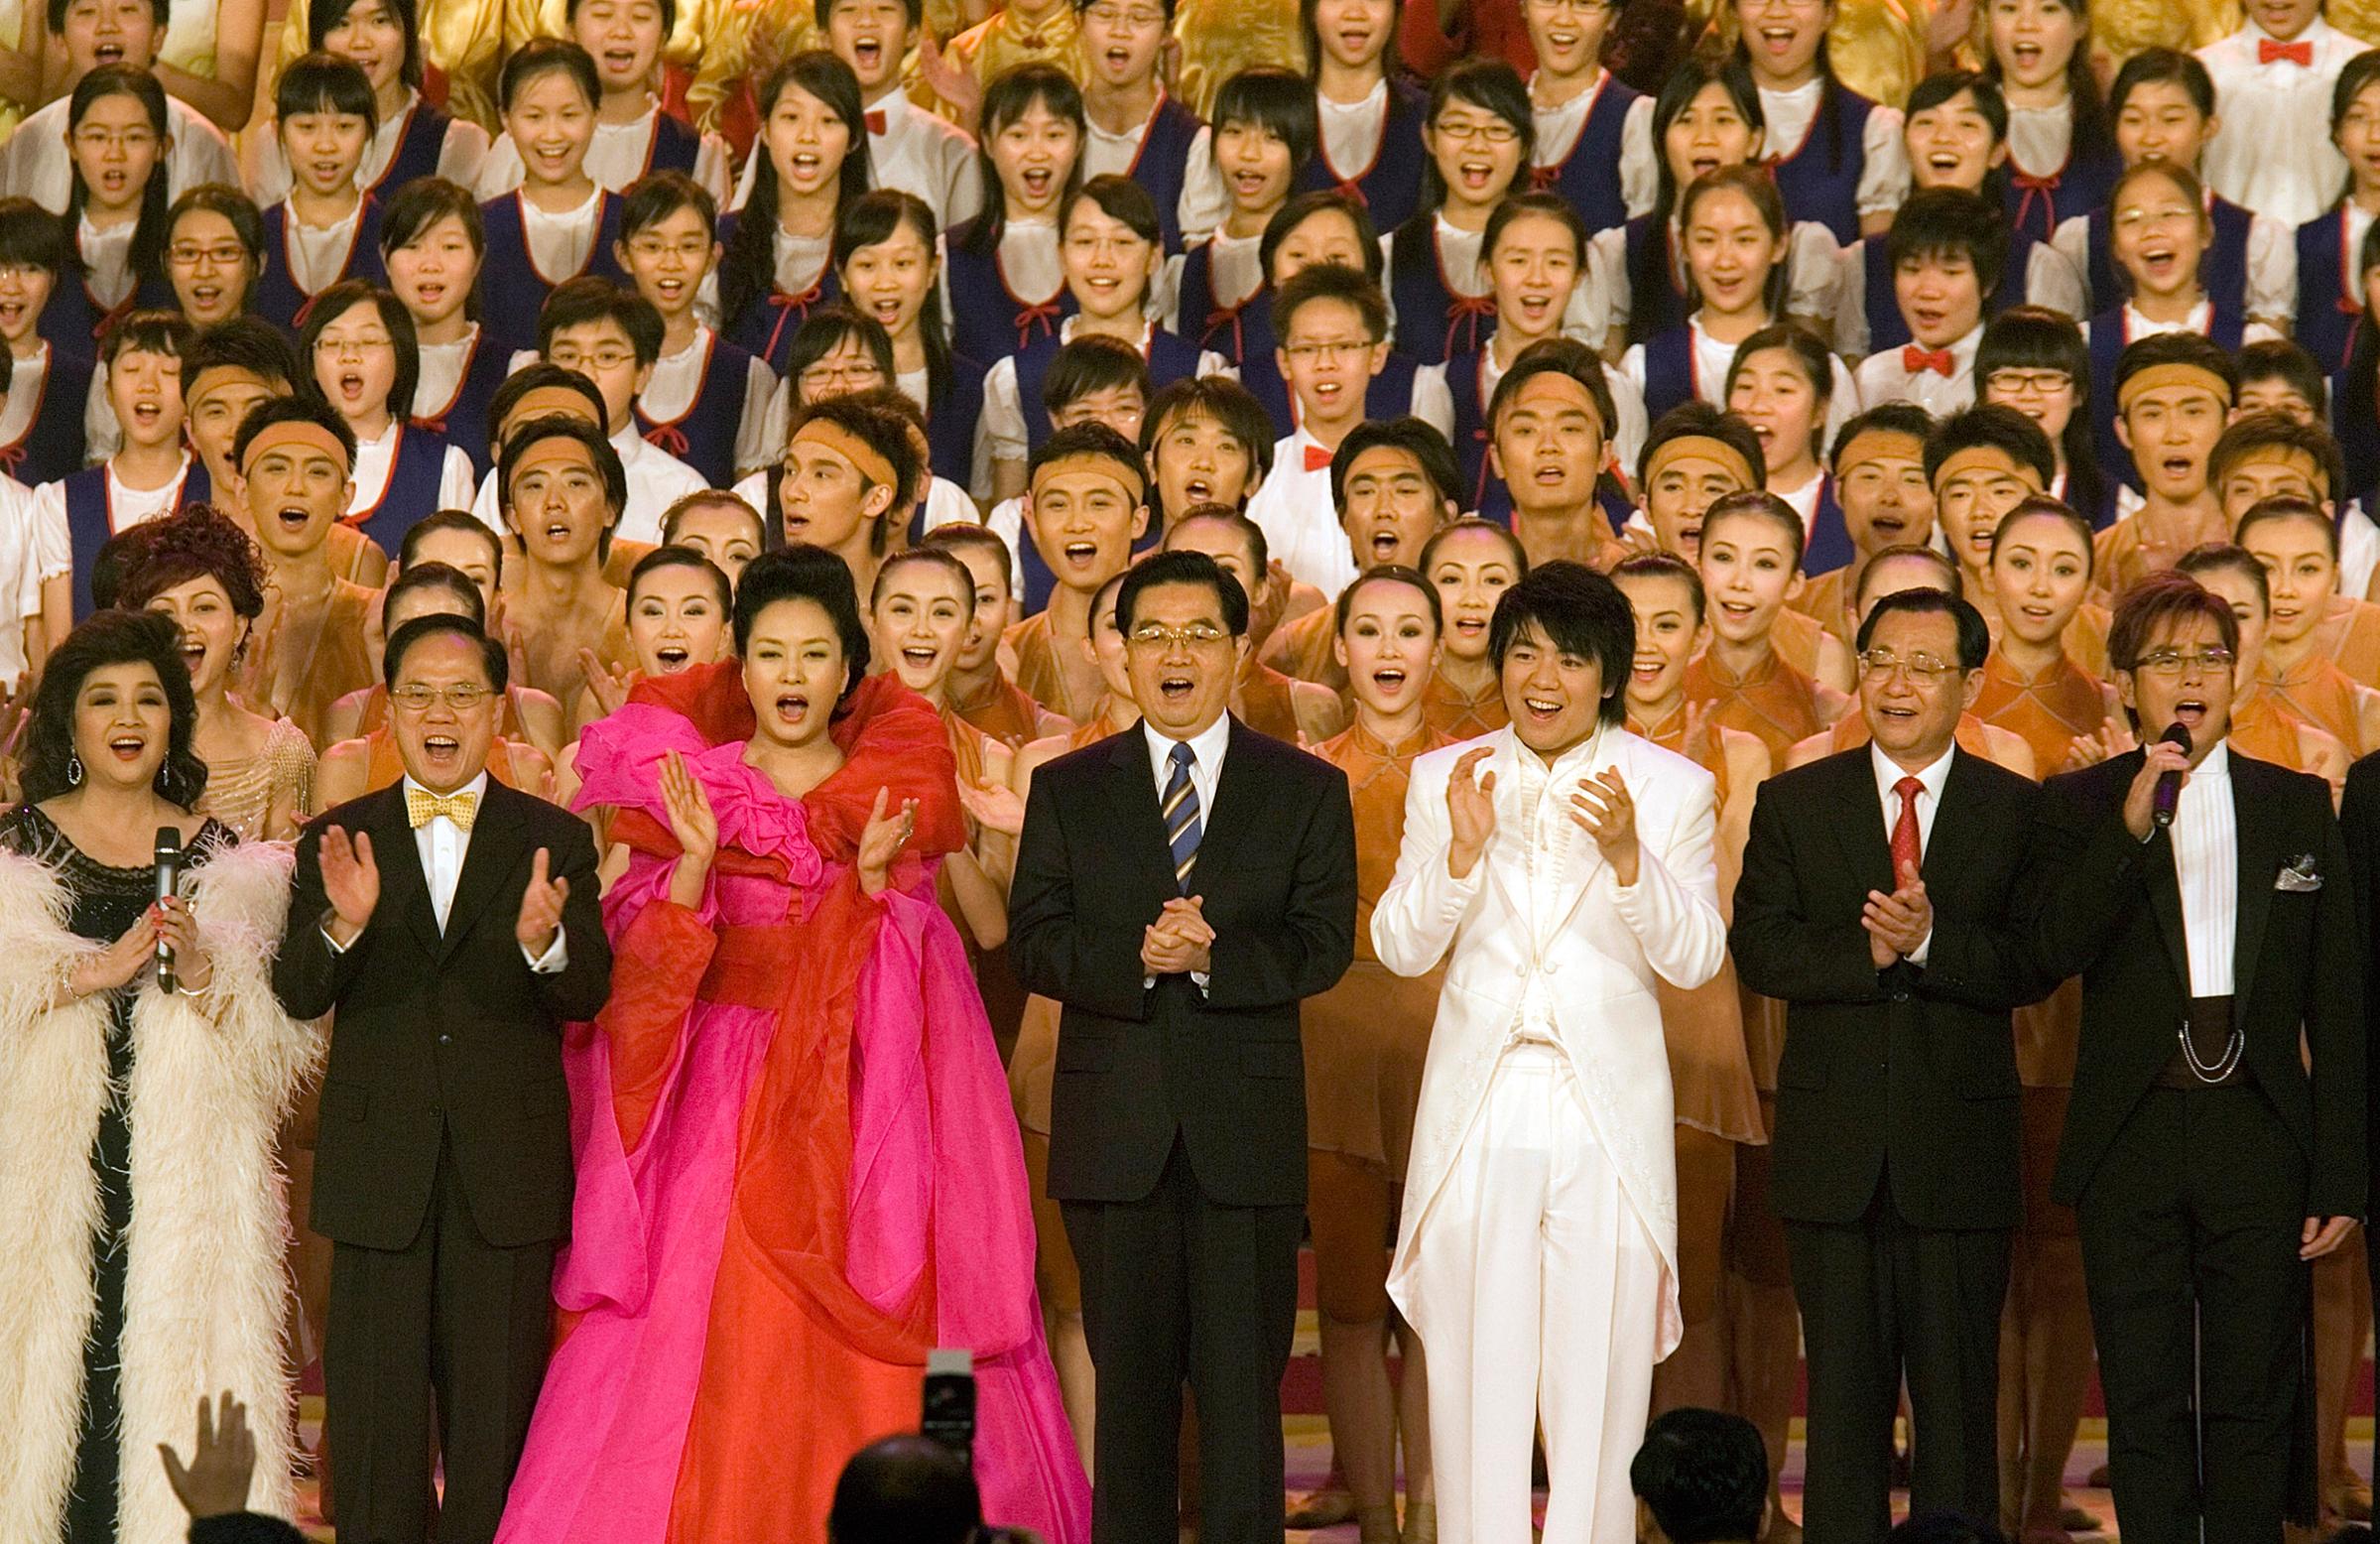 Chinese President Hu Jintao, center, sings on stage with performers at the conclusion of the Grand Variety Show in celebration of the 10th anniversary of the handover, in Hong Kong on June 30, 2007.